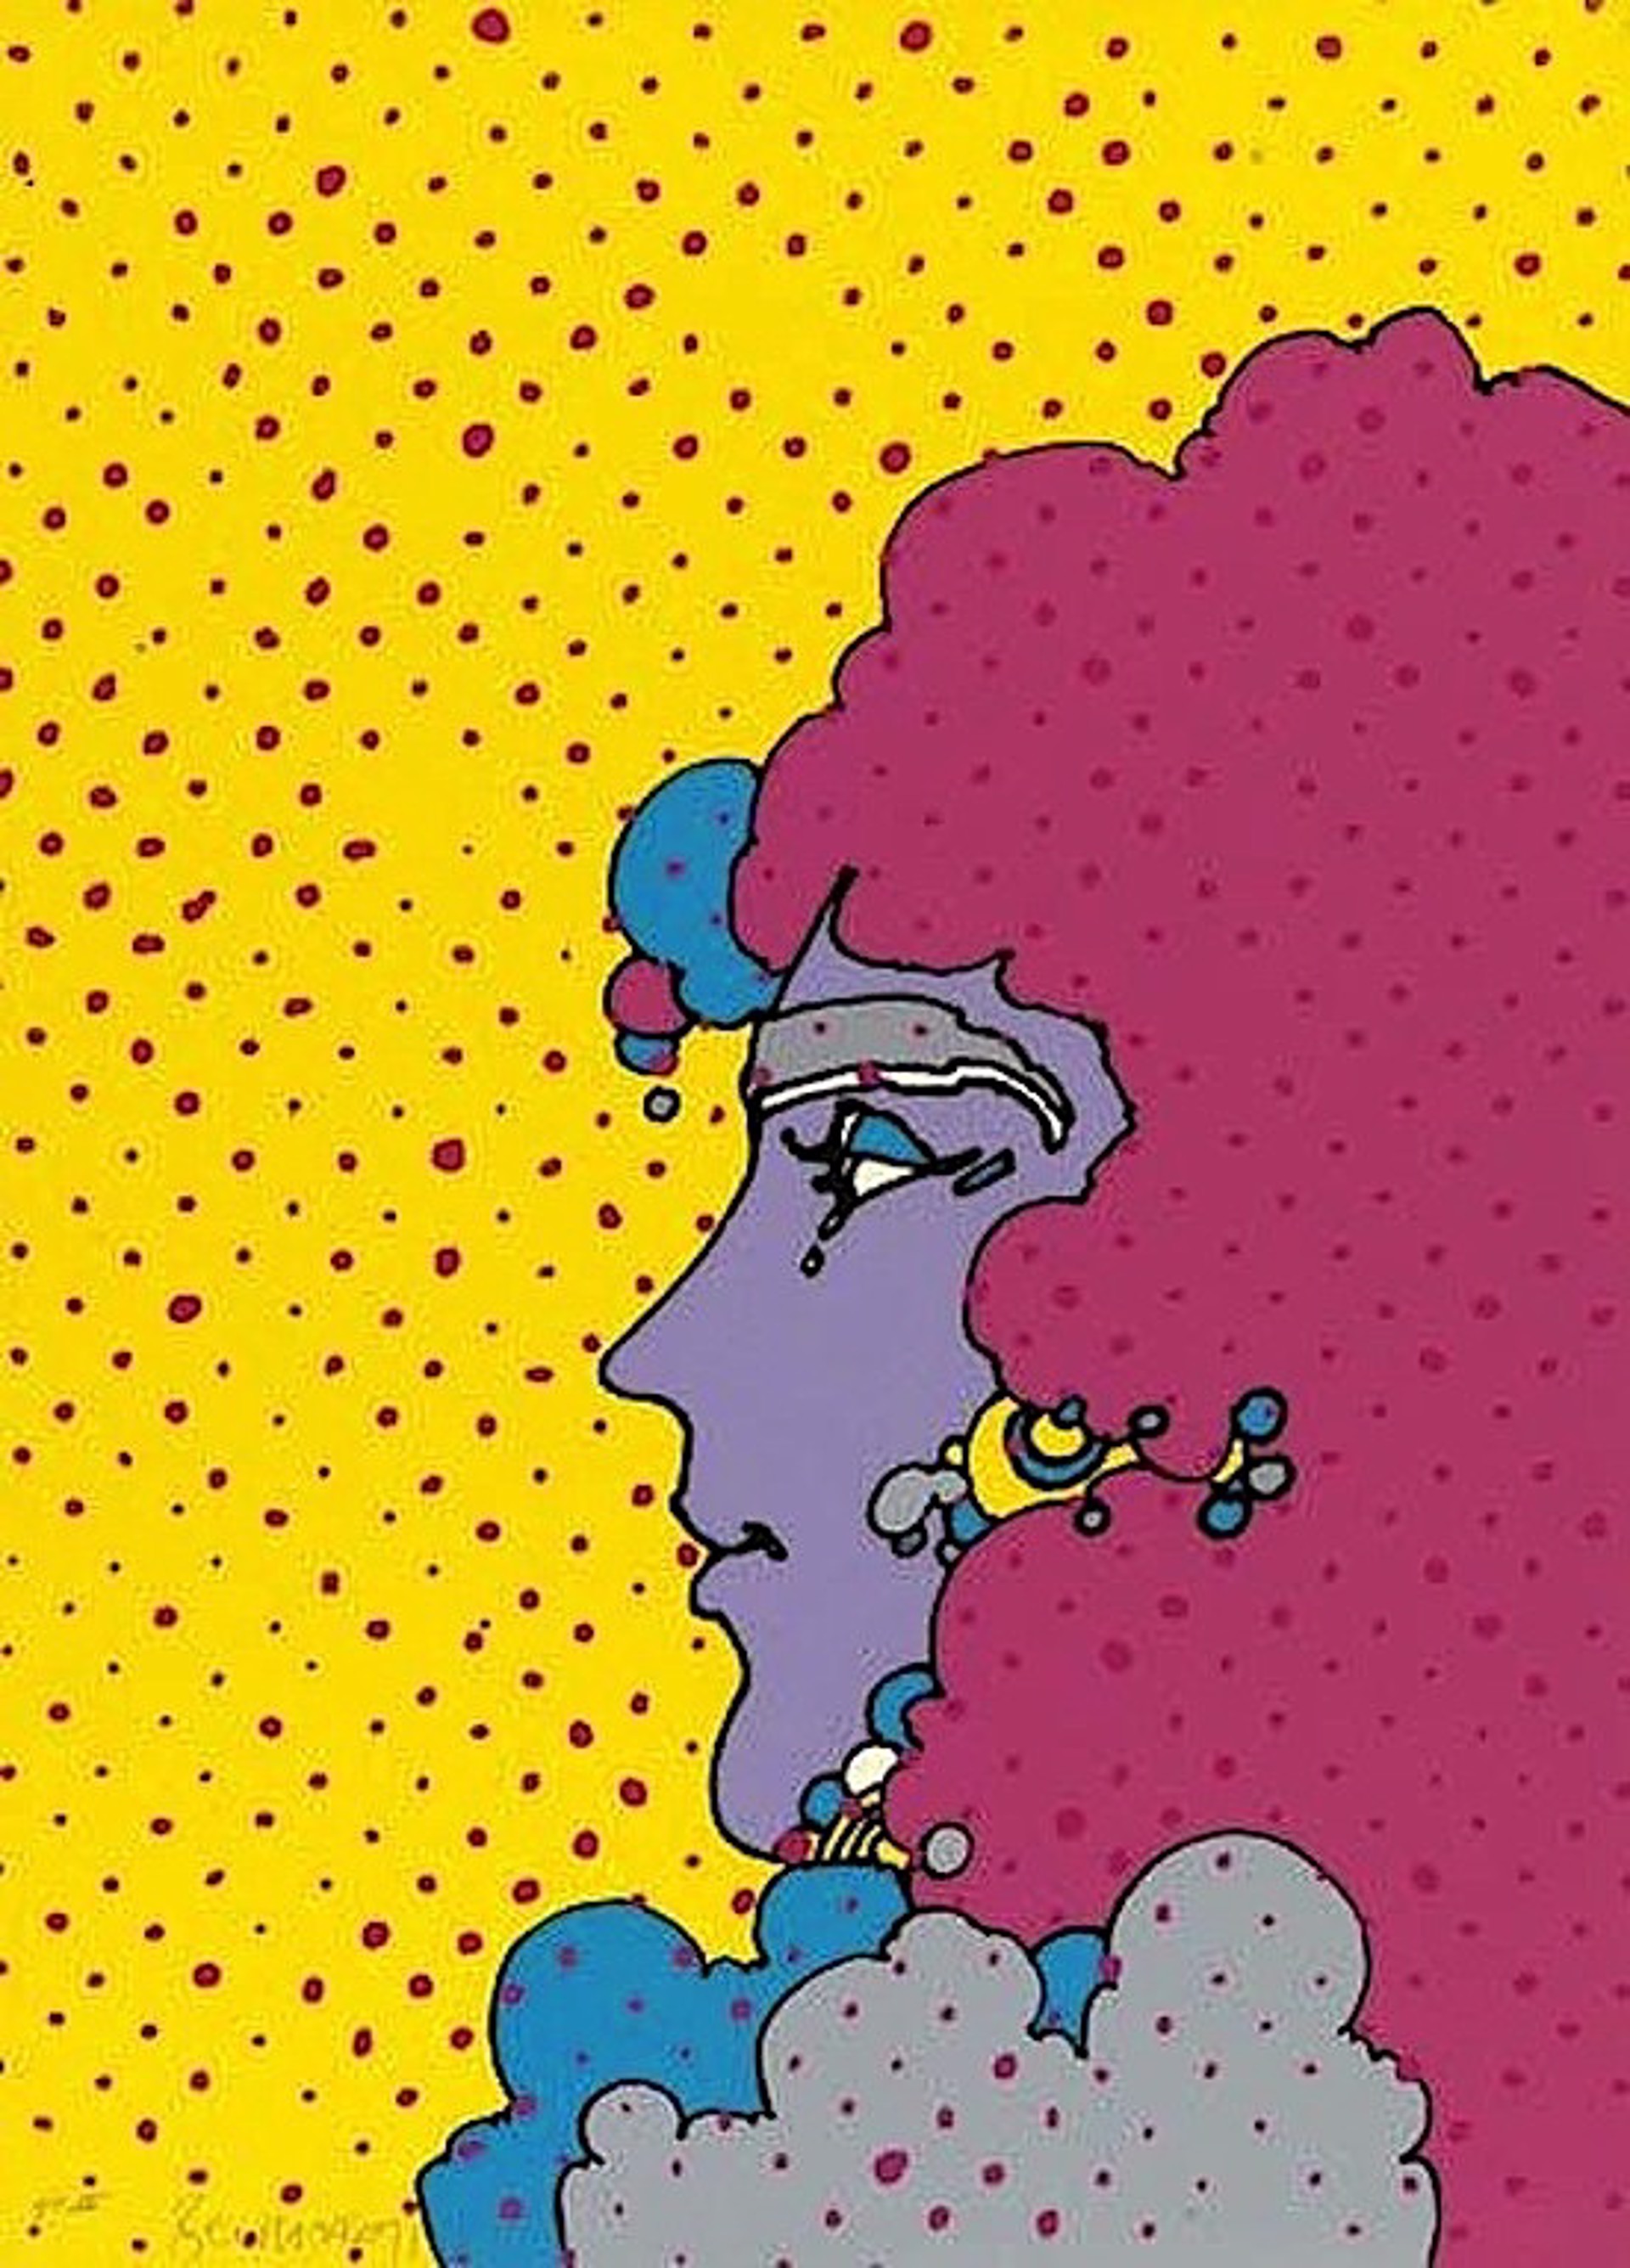 Profile with Polka Dots by Peter Max